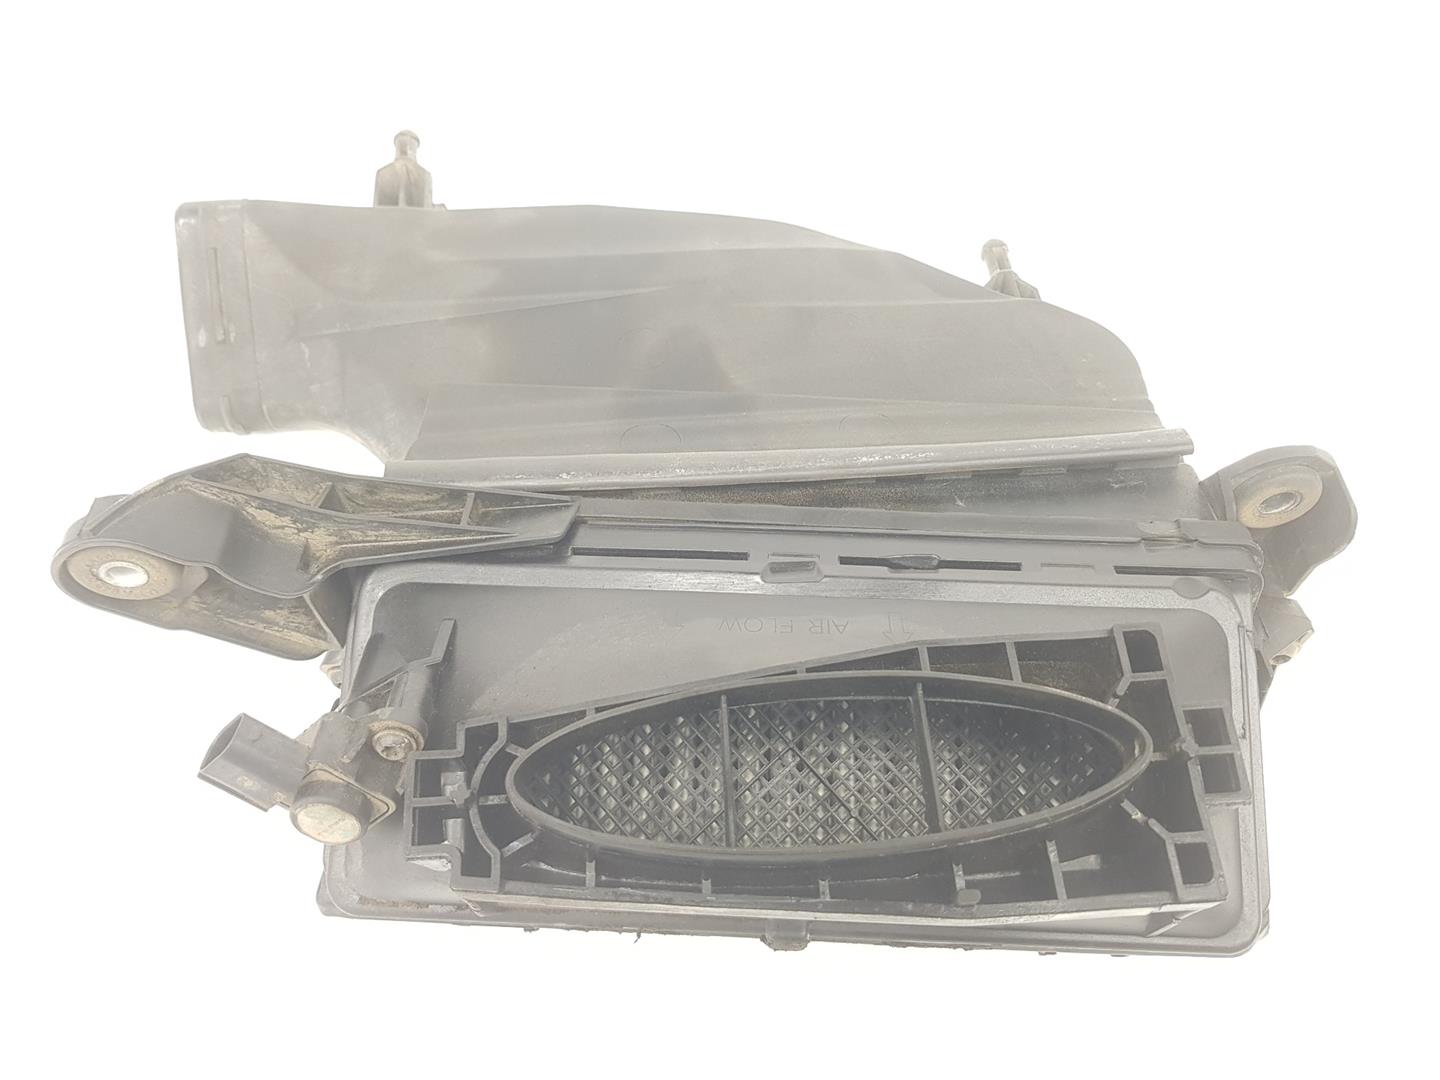 MERCEDES-BENZ M-Class W164 (2005-2011) Other Engine Compartment Parts A6420903301, A6420903301 24244152